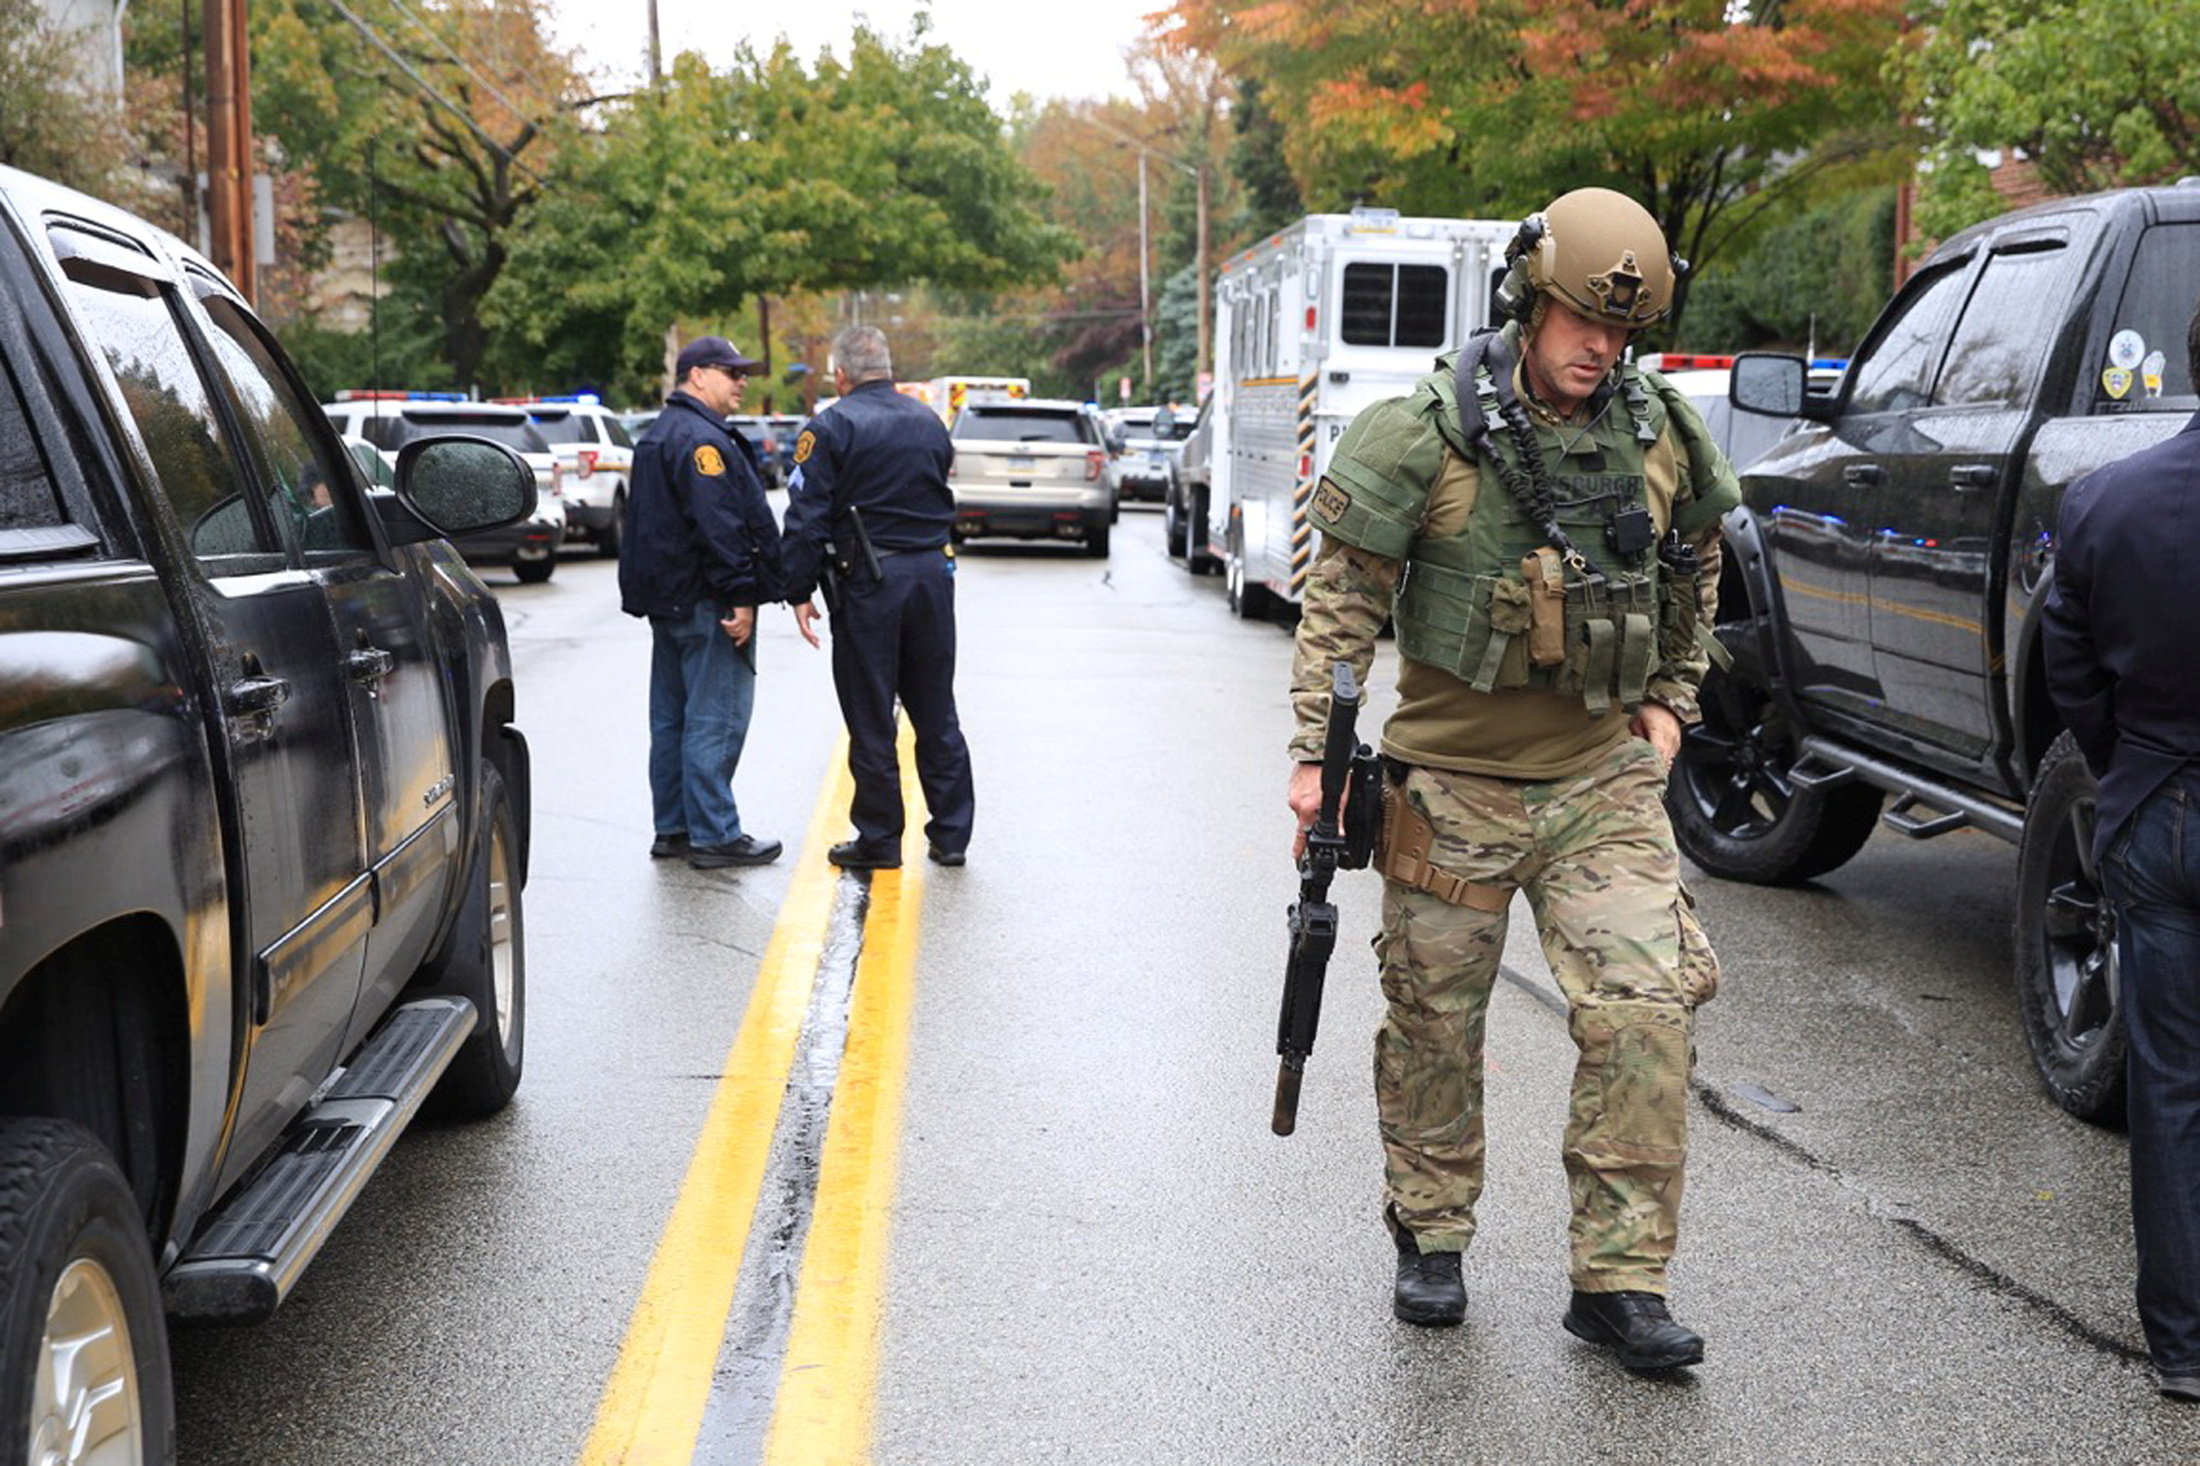 A SWAT police officer and other first responders arrive at the synagogue after a gunman opened fire.